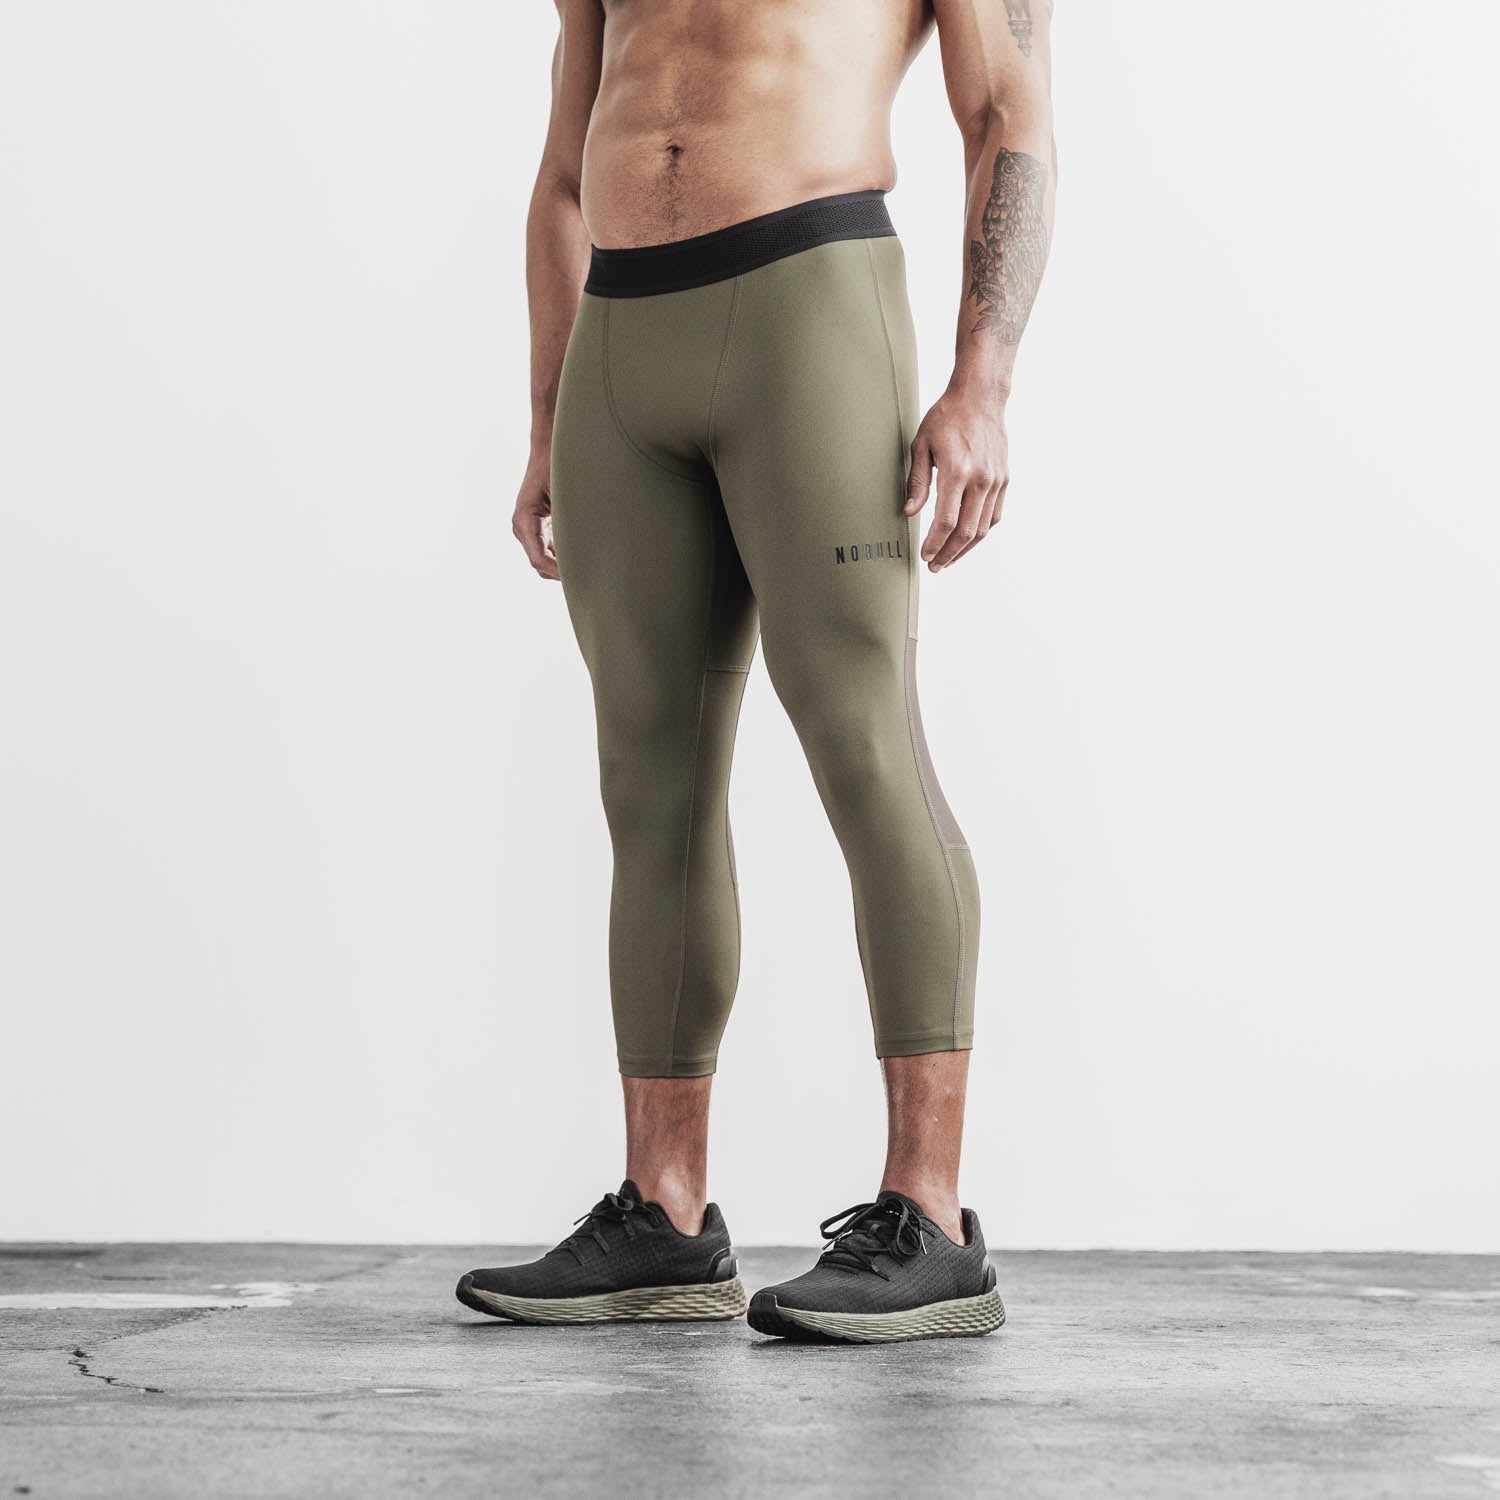 MEN'S MIDWEIGHT COMPRESSION TIGHT 23, ARMY GREEN